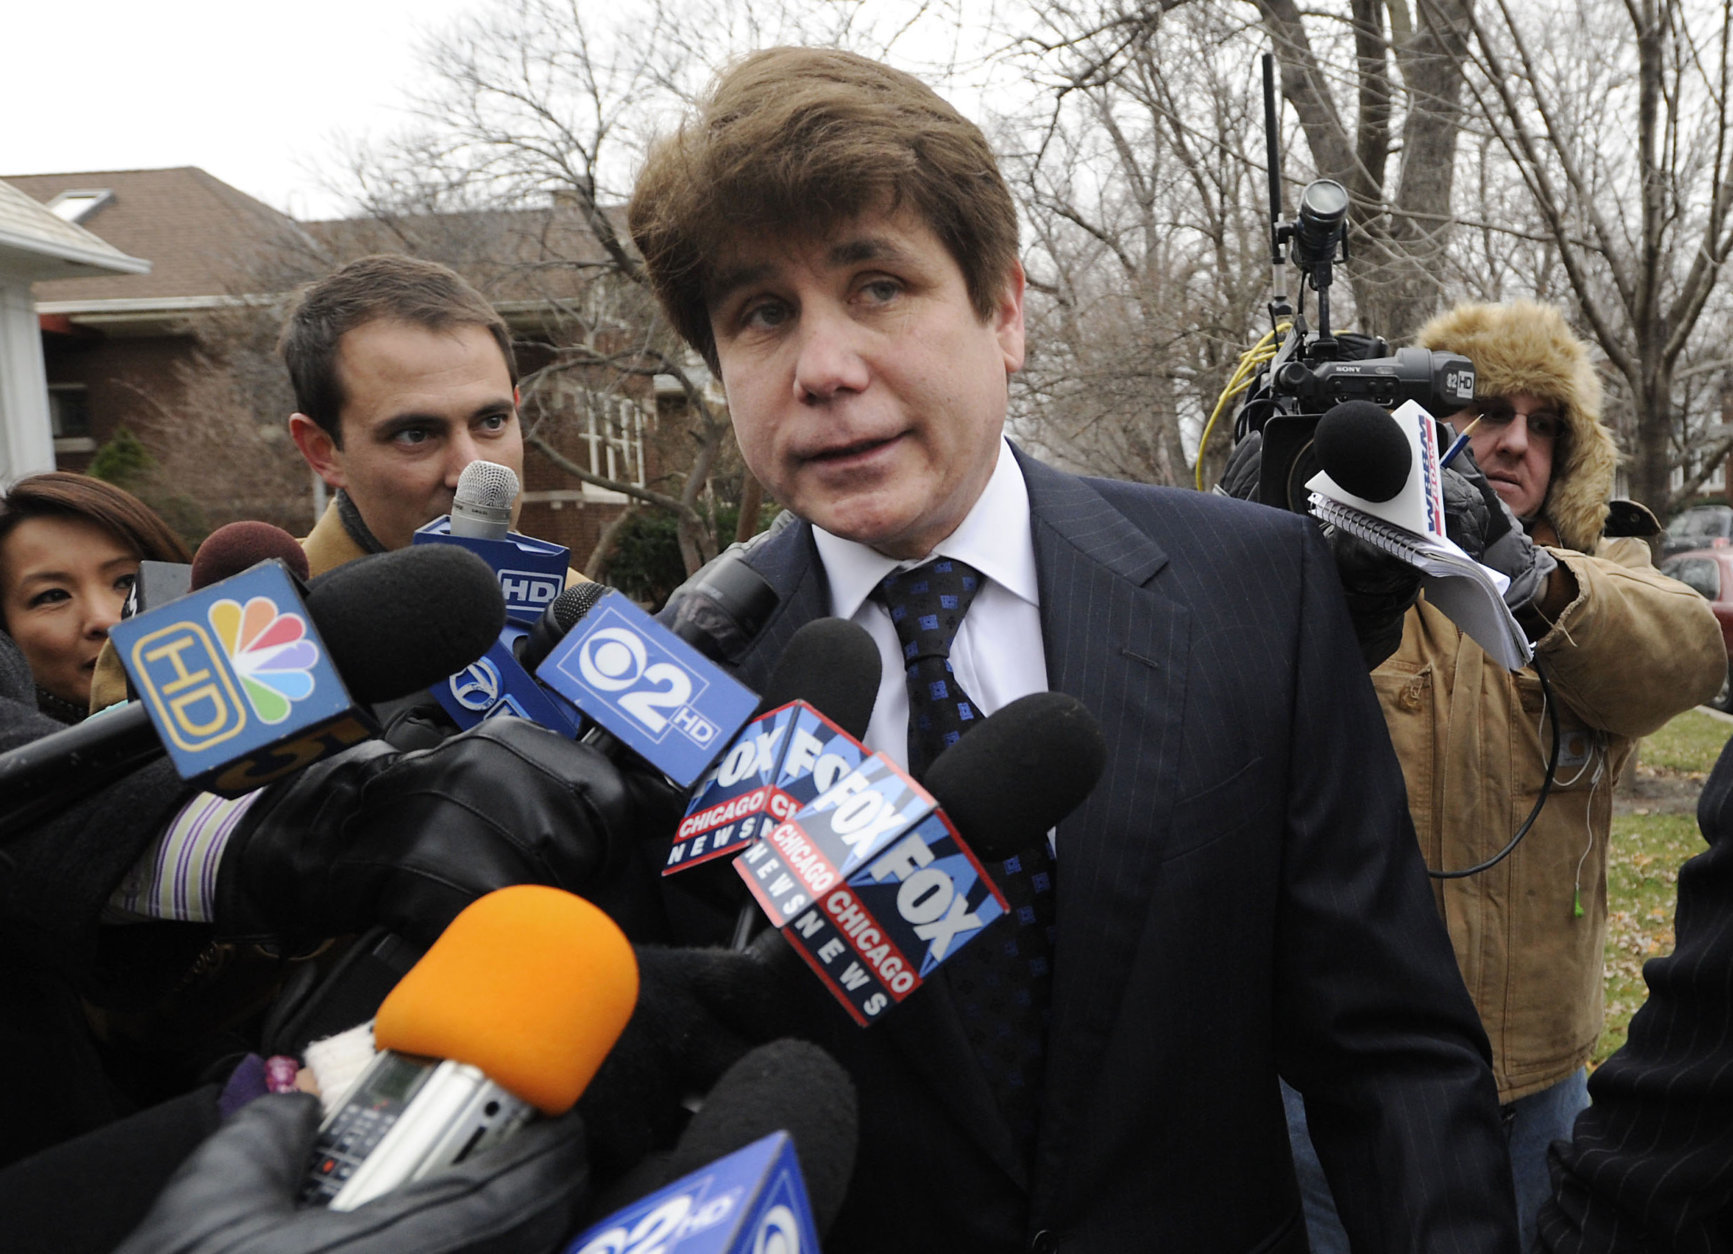 Former Illinois Governor Rod Blagojevich heads to federal court for his sentencing hearing in Chicago, Tuesday, Dec. 6, 2011.   Blagojevich was convicted earlier this year on 18 corruption counts, including trying to auction off President Barack Obama's old U.S. Senate seat.   (AP Photo/Paul Beaty)